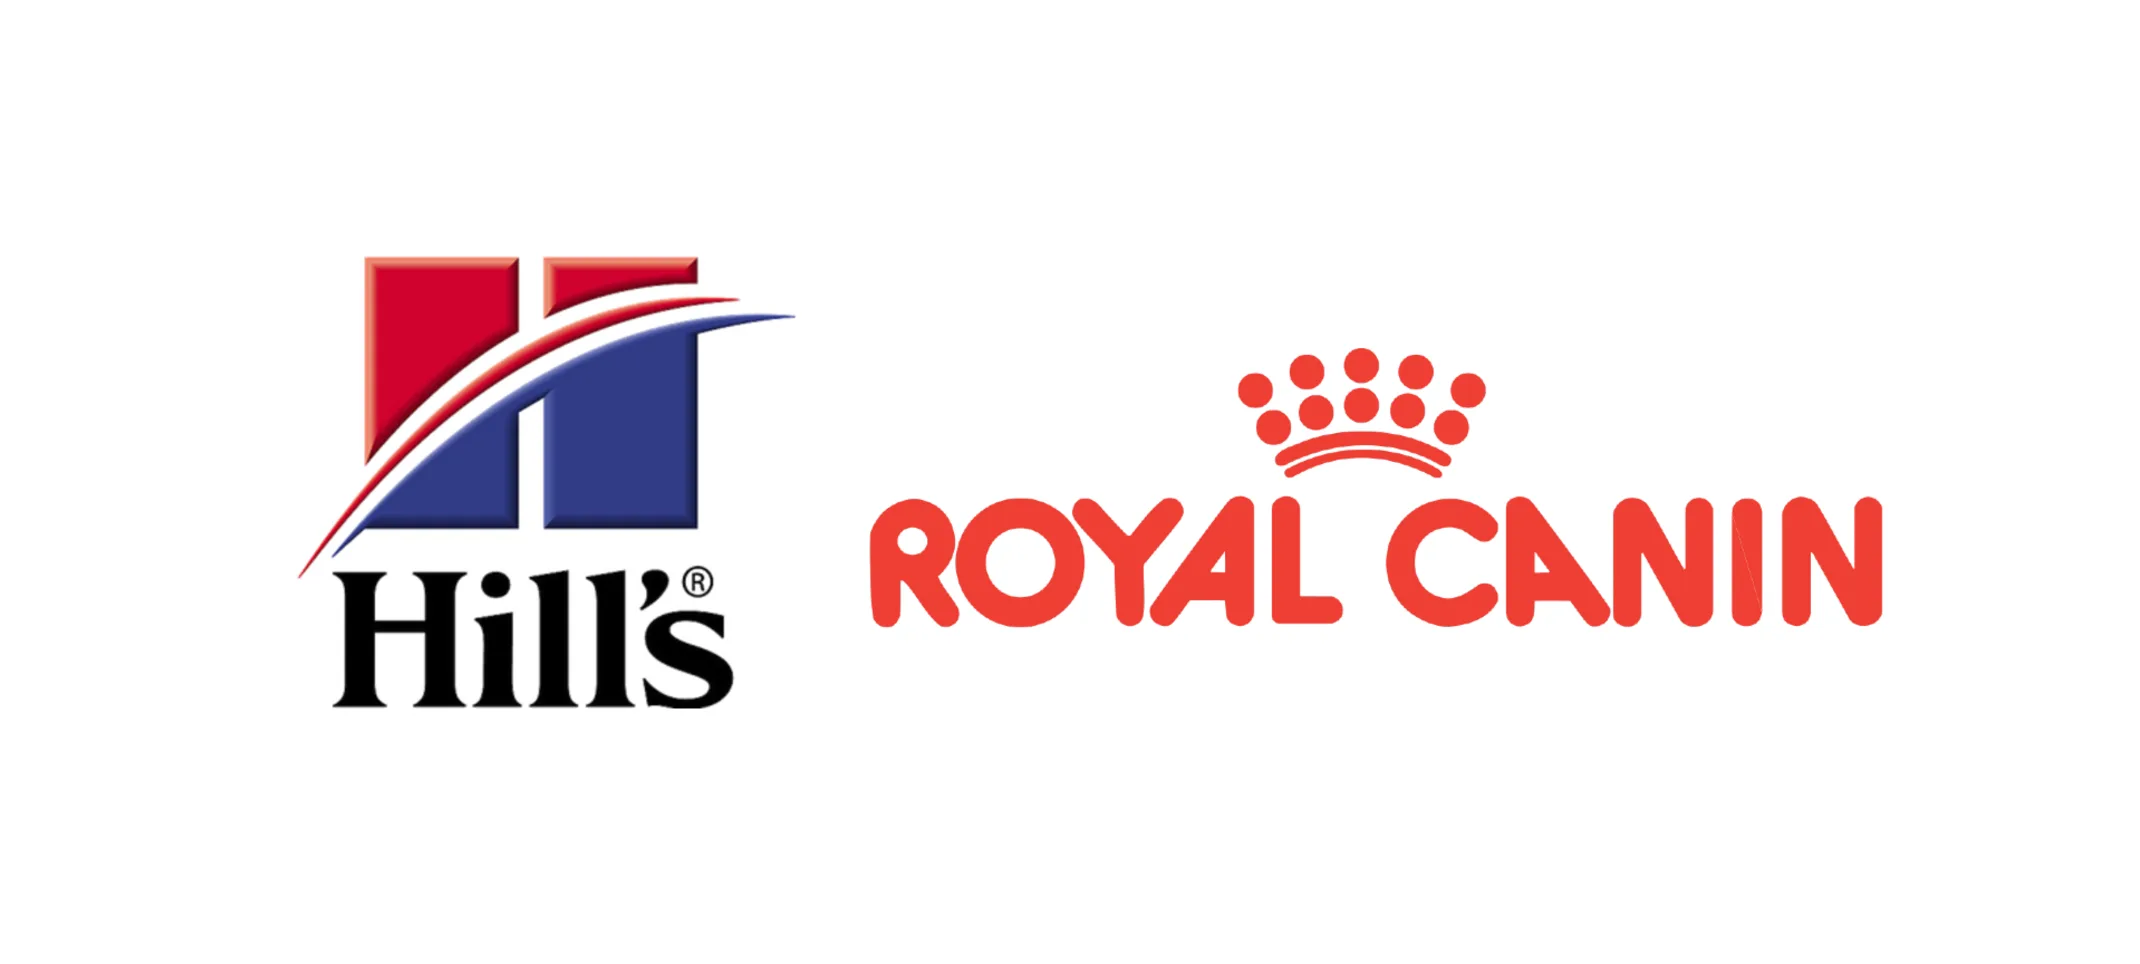 Hill's and Royal Canin brand dog foods